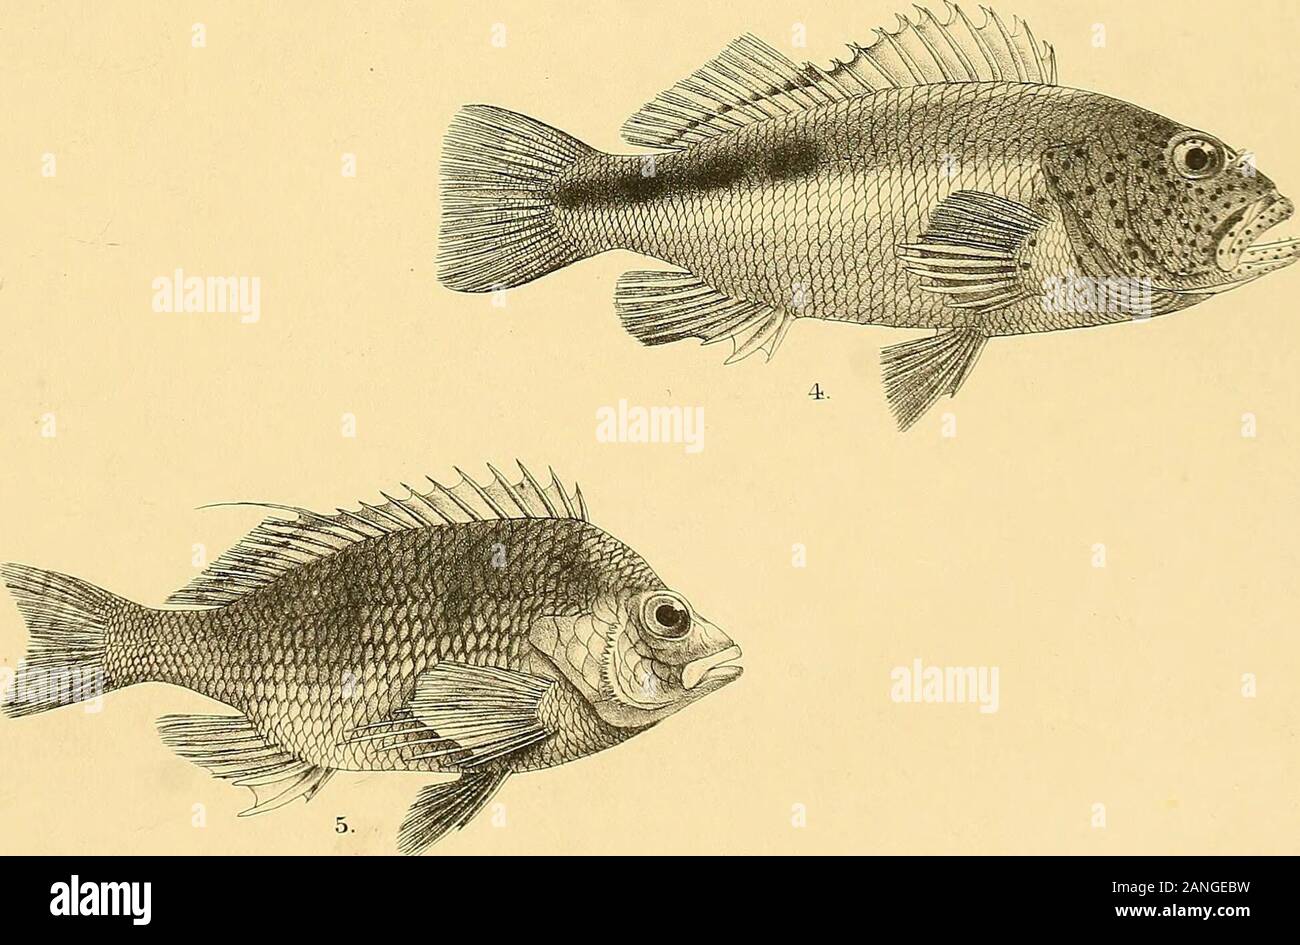 The fishes of India; being a natural history of the fishes known to inhabit the seas and fresh waters of India, Burma, and Ceylon . GiiFord del p.Mimerr. Mi Mint era. Sros. imp. 1 CHRYSOPHRYS HAFFARA. 2, C. BERDA (VARIETY CALAMARA). 3, PIMELEPTERUS CINERASCENS. 4,CIRRH1TES FORSTERI. 5, CIRRHITICHTHYS AUREUS. DaVs Fishes of India. Stock Photo